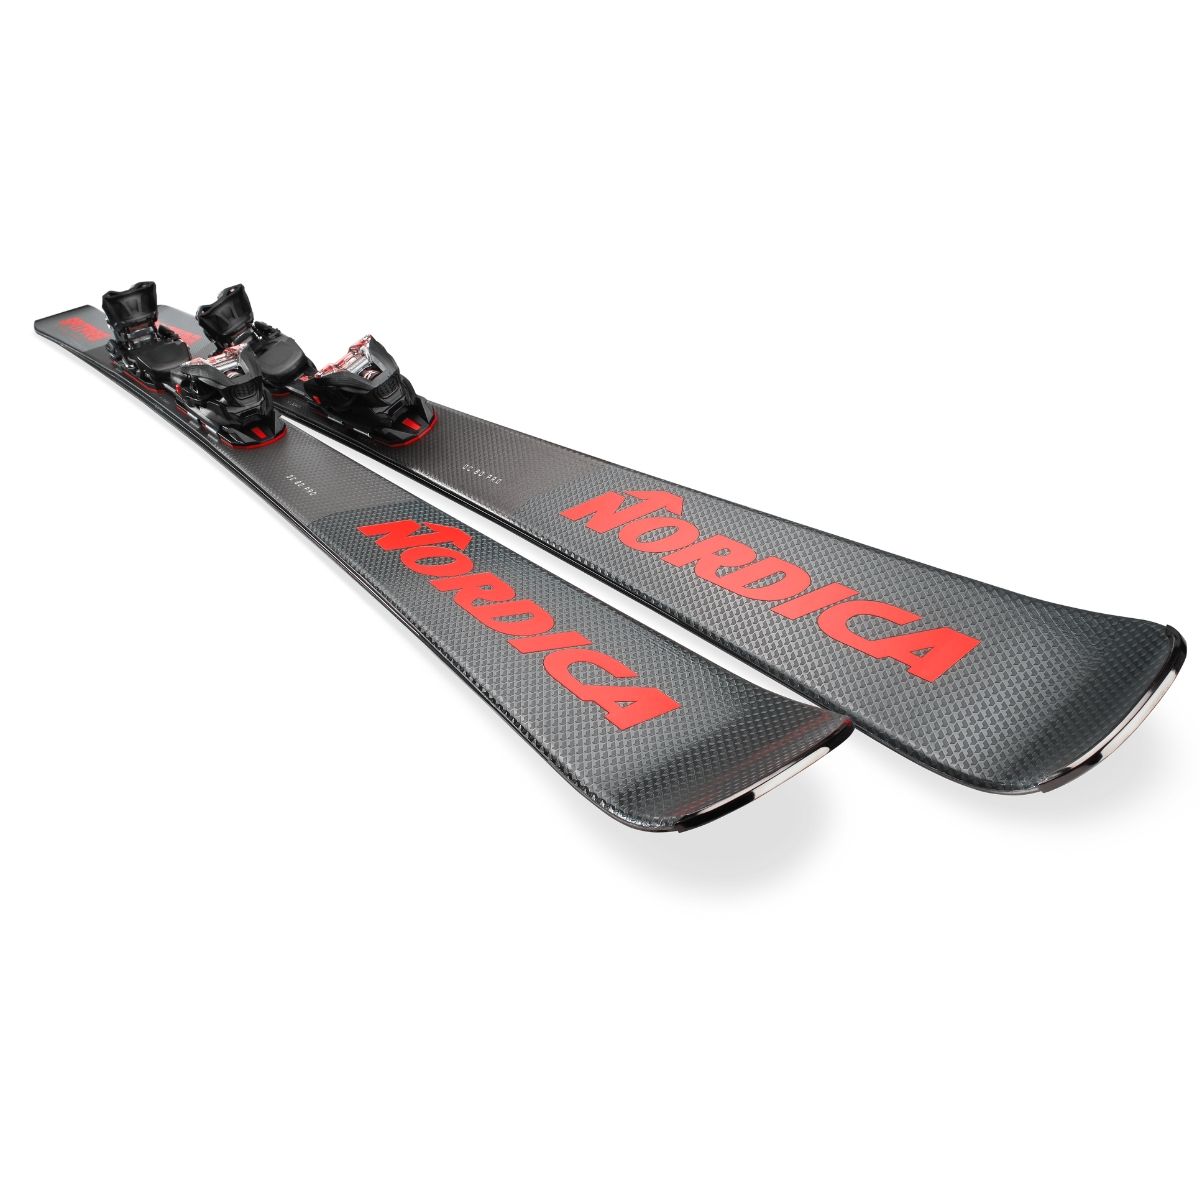 Nordica Skiset Spitfire DC 80 Pro FDT + XCELL grey red Art. 0A3531LB